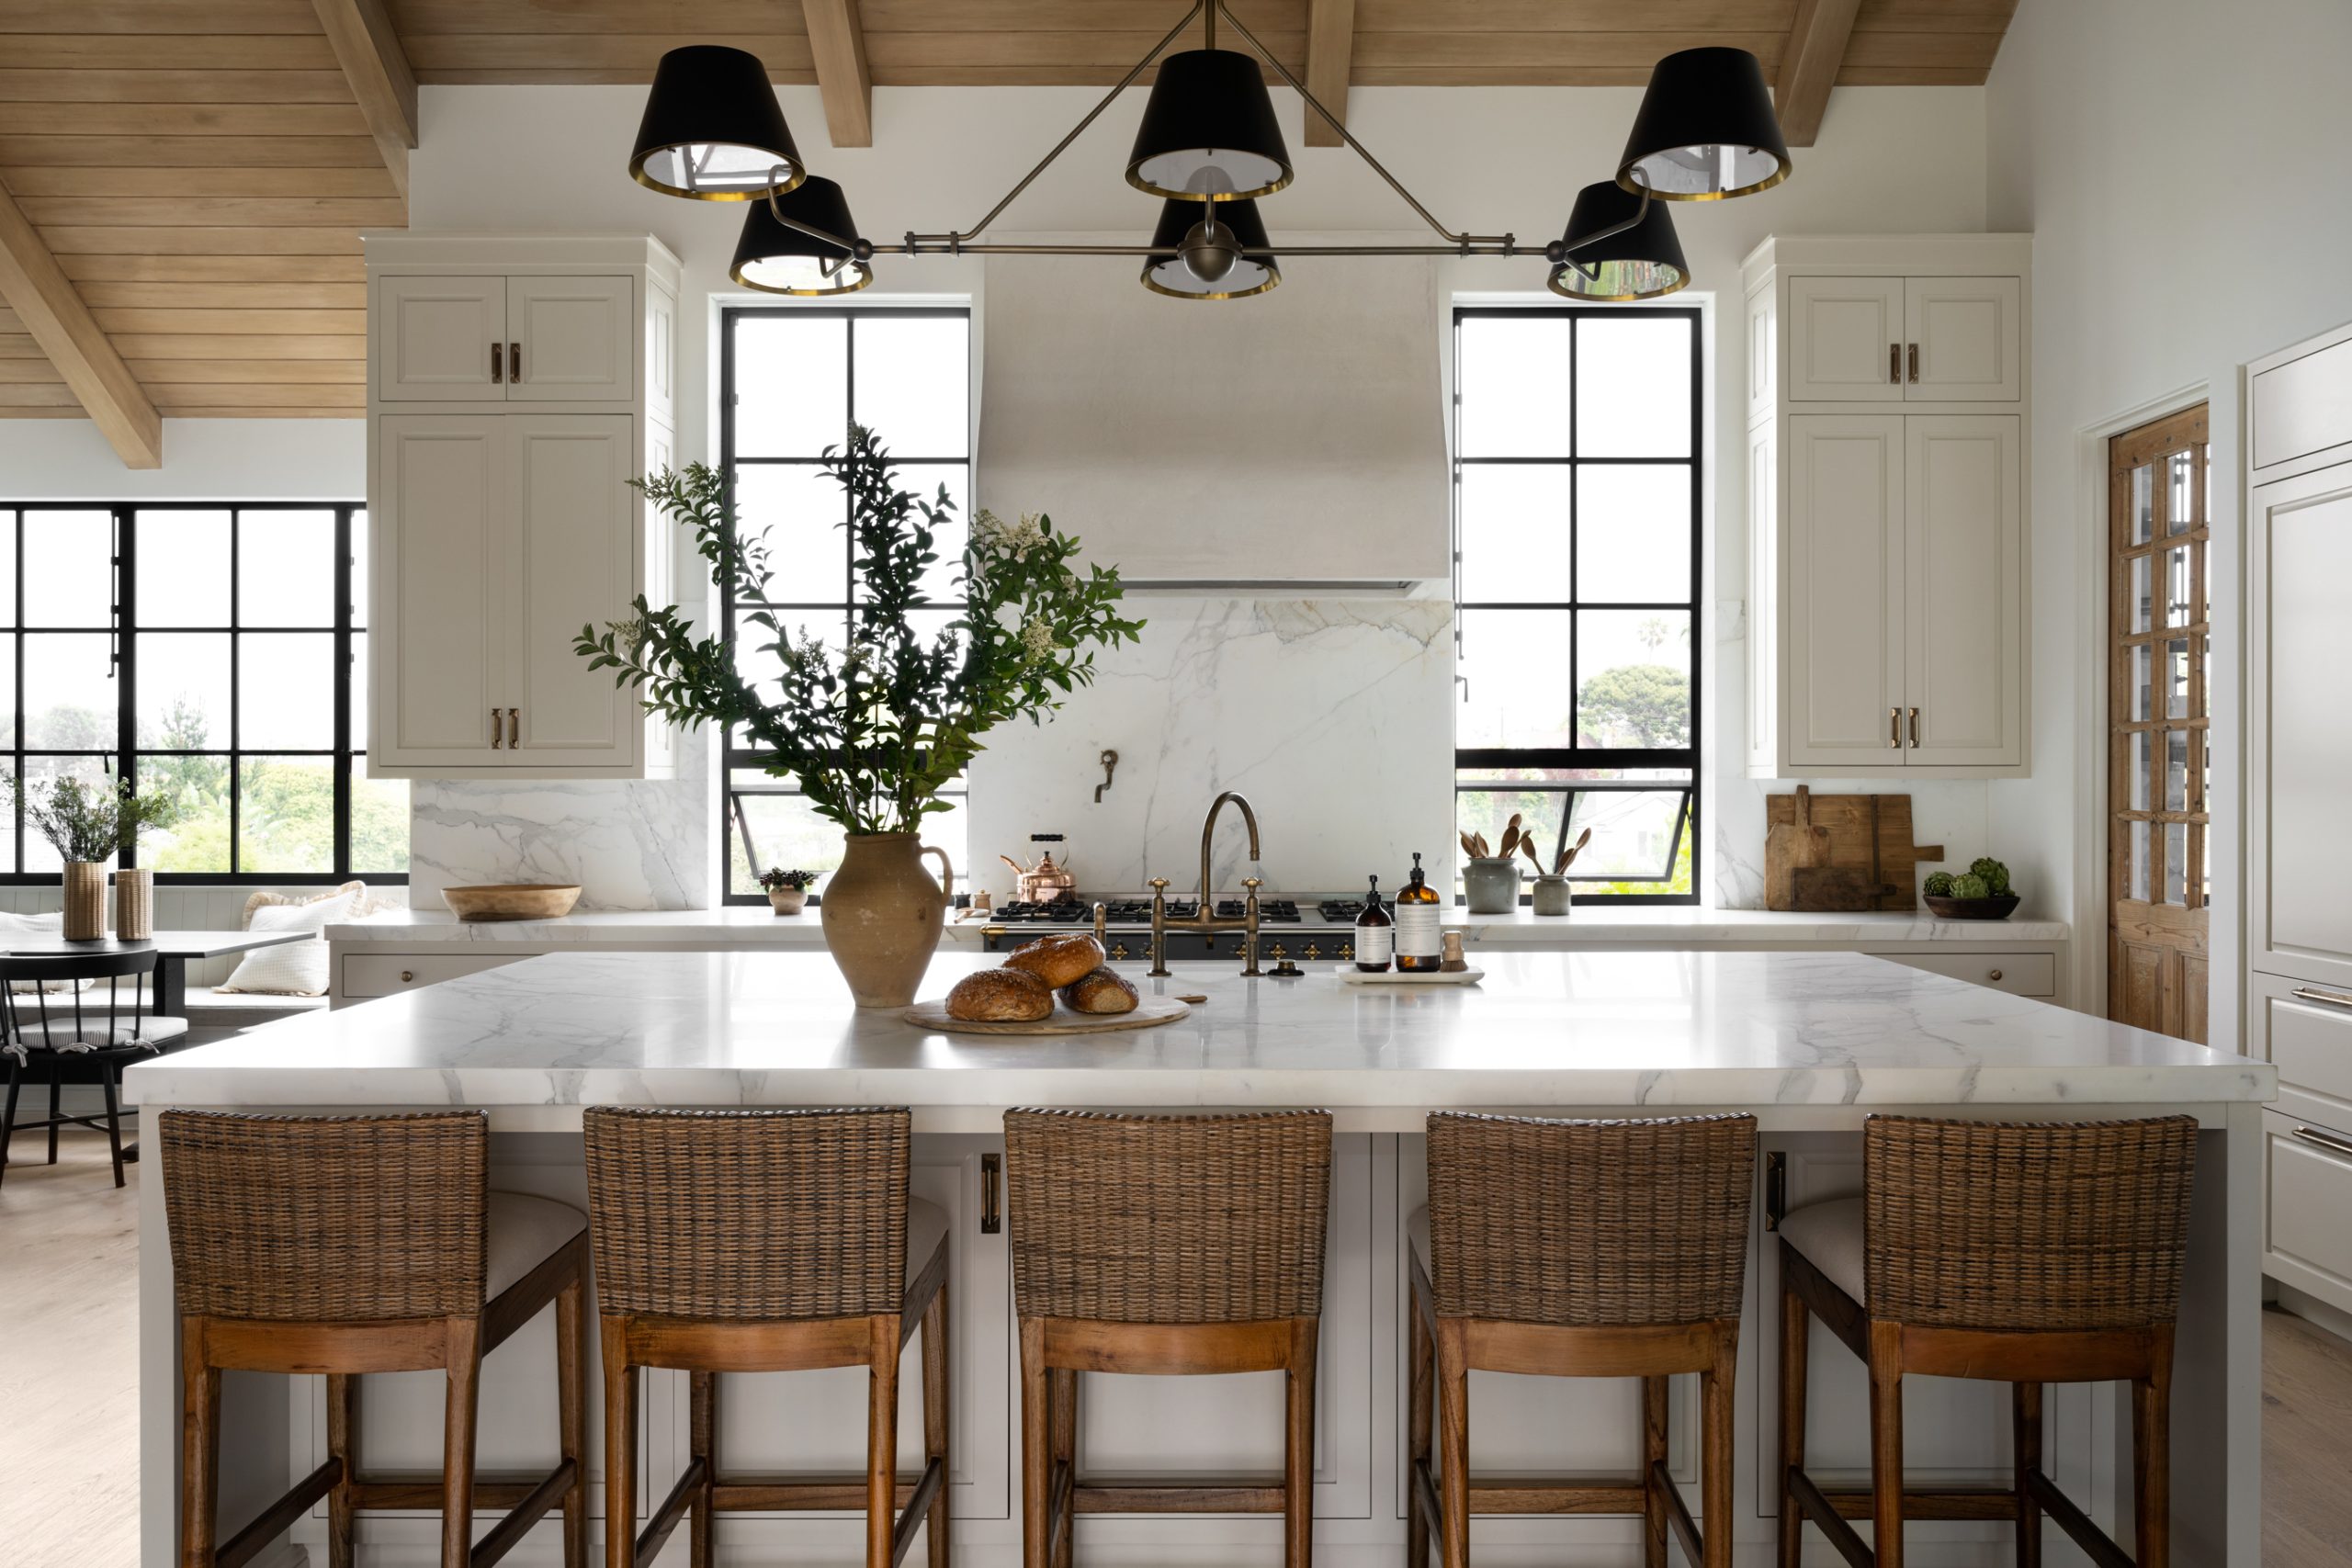 Kitchen with white cabinetry and white marble countertops with woven counter stools